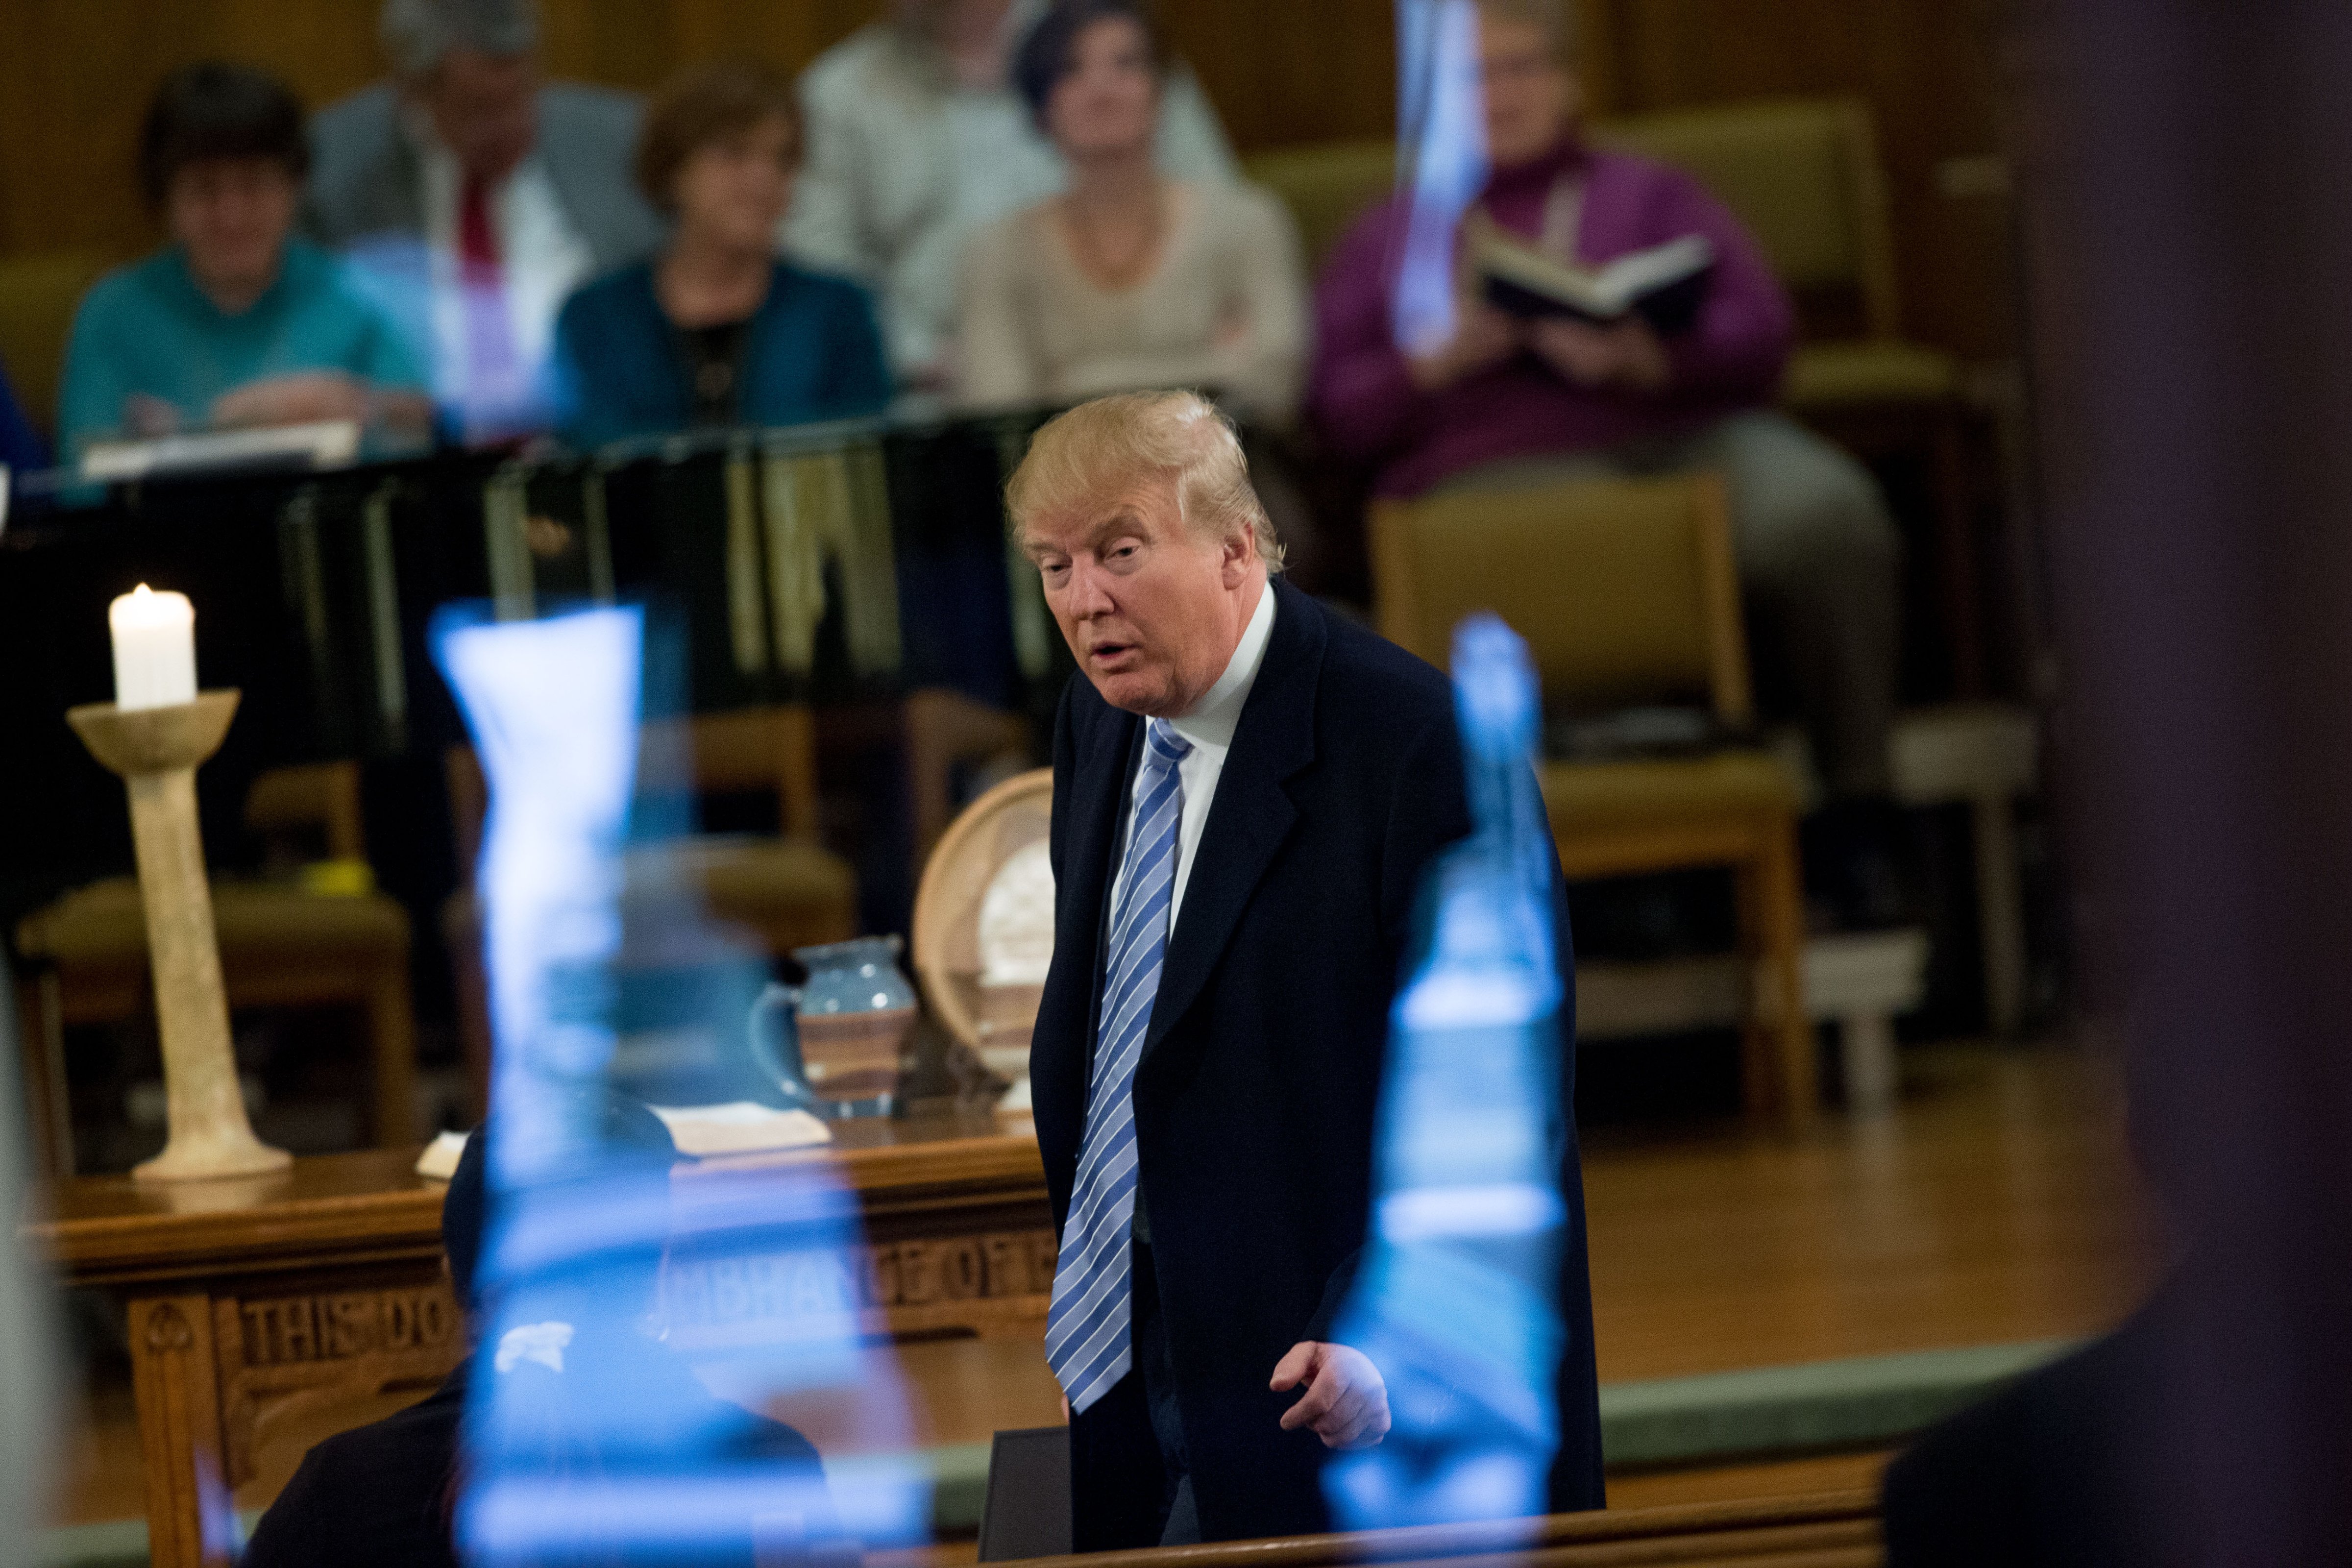 Republican presidential candidate Donald Trump arrives for service at First Presbyterian Church in Muscatine, Iowa, Sunday, Jan. 24, 2016. (Andrew Harnik—AP)